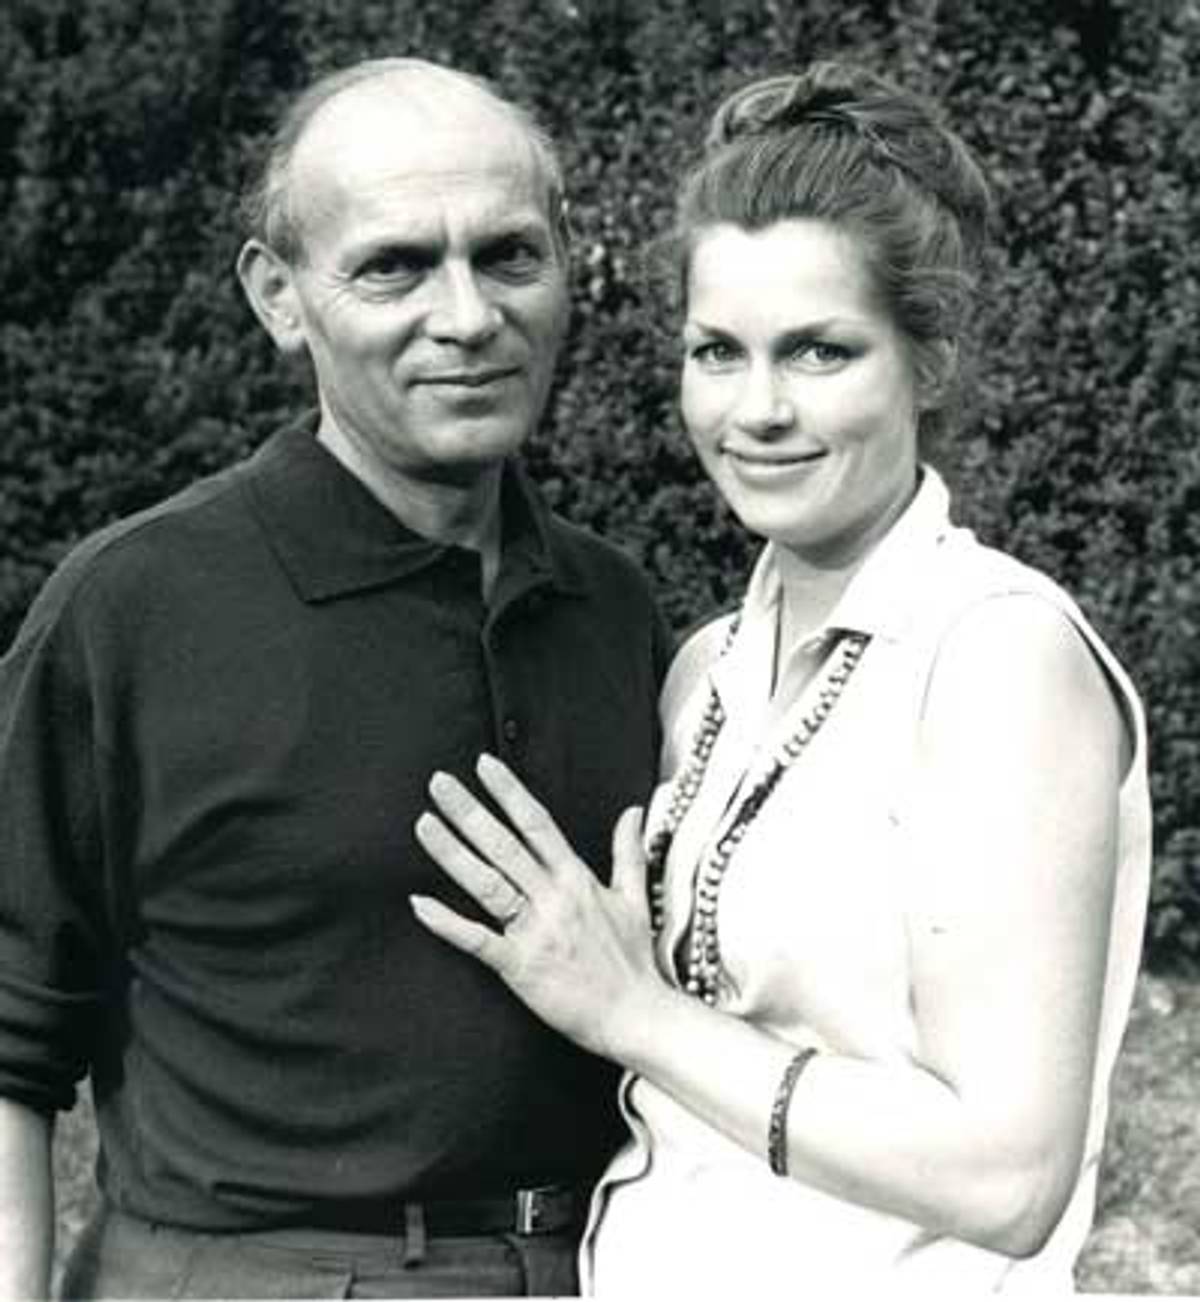 Leo Kerz with his wife Louise Hirschfeld in an undated photo. (Photo courtesy Louise Hirschfeld)